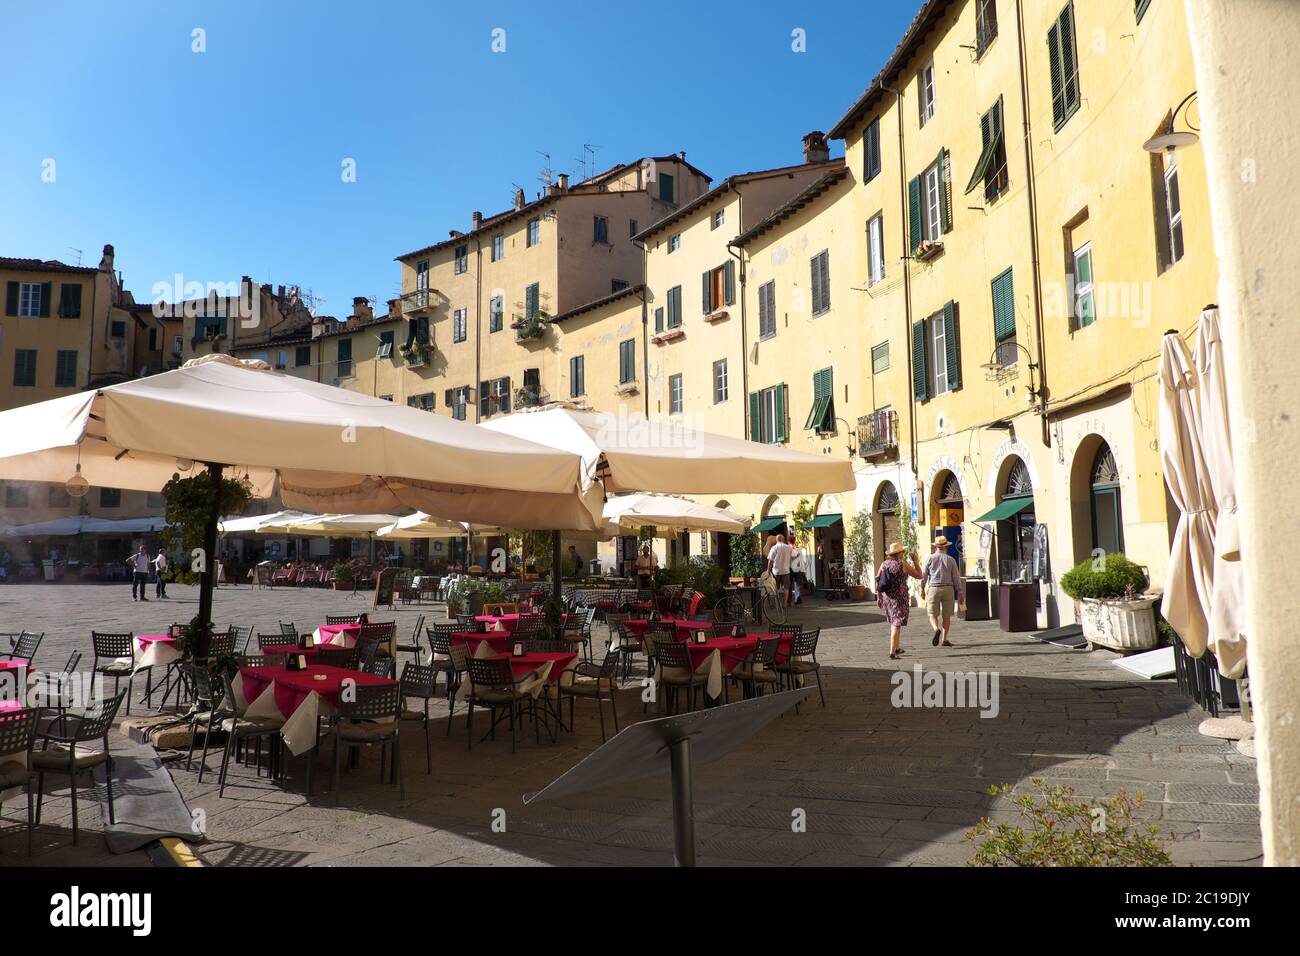 Piazza dell'Anfiteatro in the walled city of Lucca, Tuscany, Italy. The original Roman amphitheatre was built in the first century AD Stock Photo